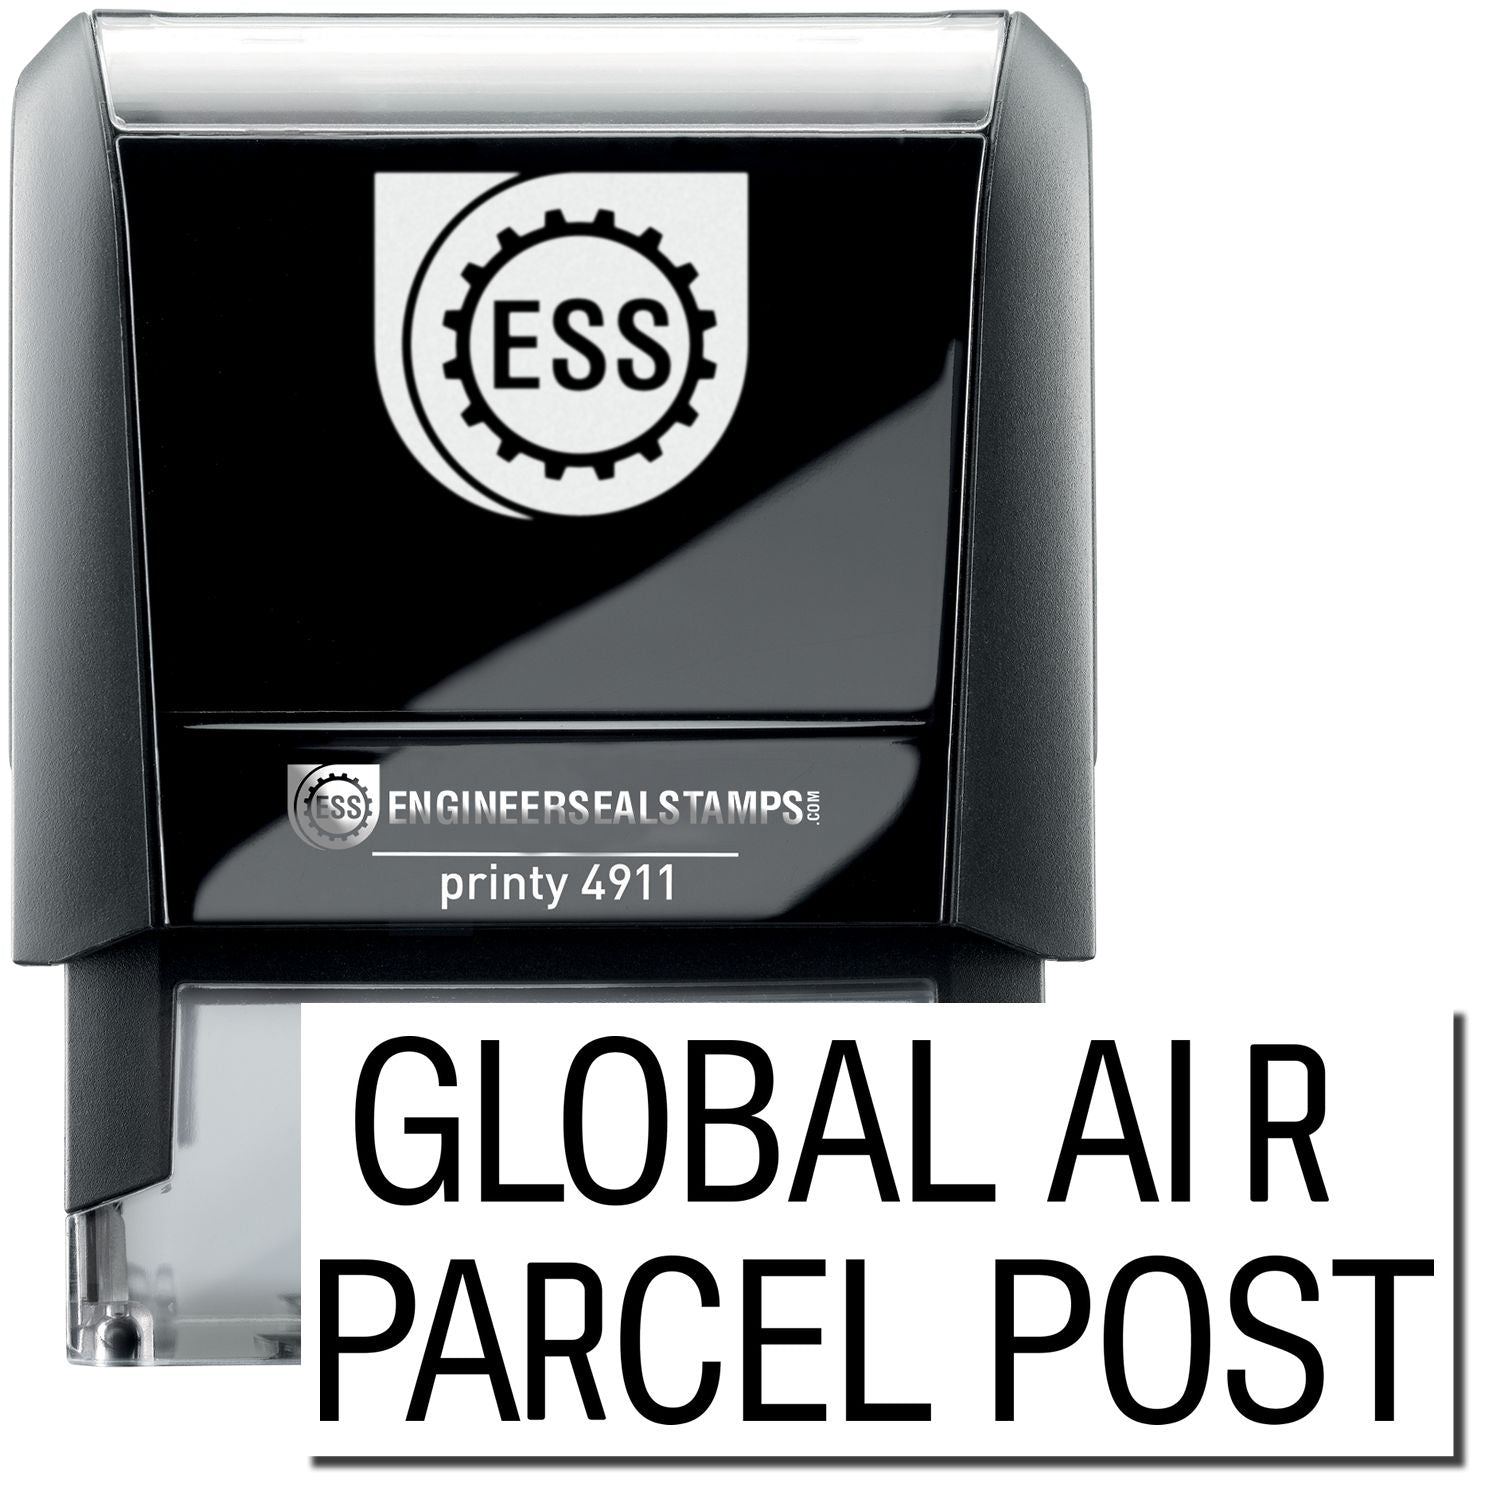 A self-inking stamp with a stamped image showing how the text "GLOBAL AIR PARCEL POST" is displayed after stamping.